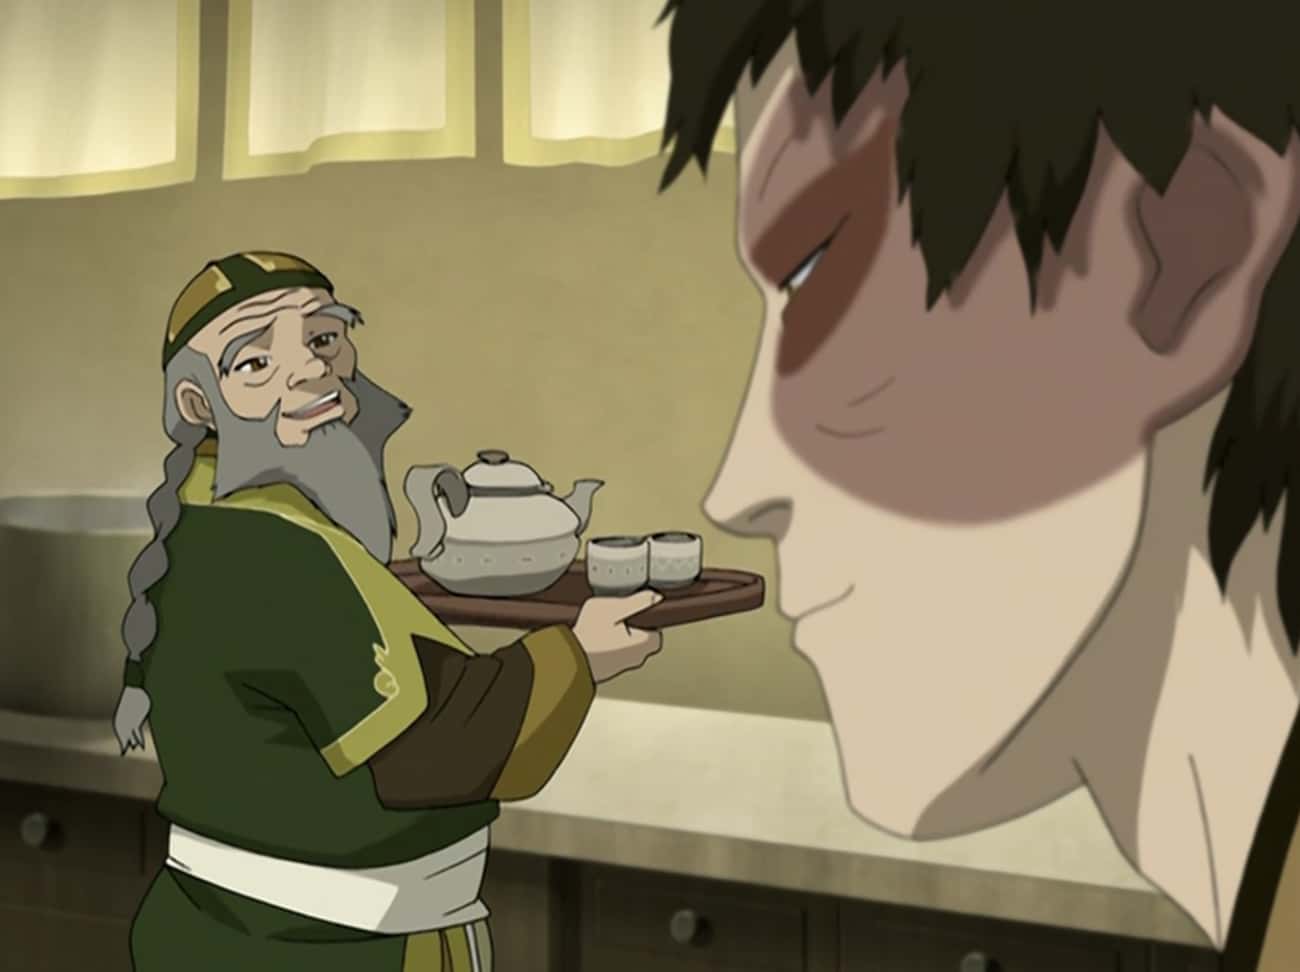 Iroh's Tea-Making Involves All Four Elements